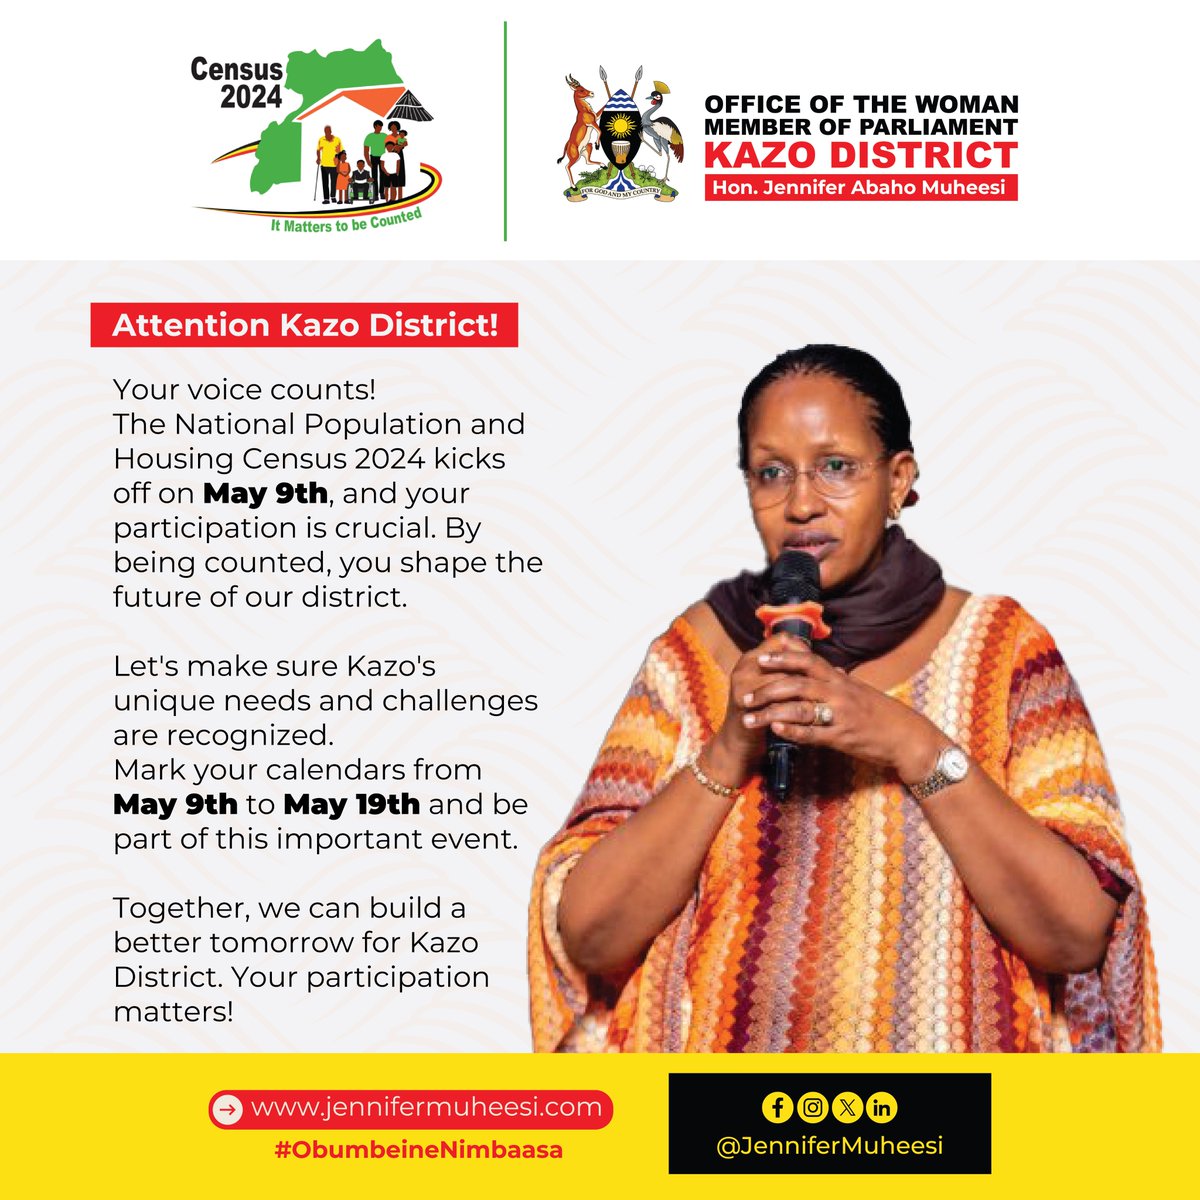 Dear all, I urge each and every one of you to actively participate in this significant national exercise. Your participation matters. It ensures that our district receives the resources and services it rightfully deserves. jennifermuheesi.com/census2024/